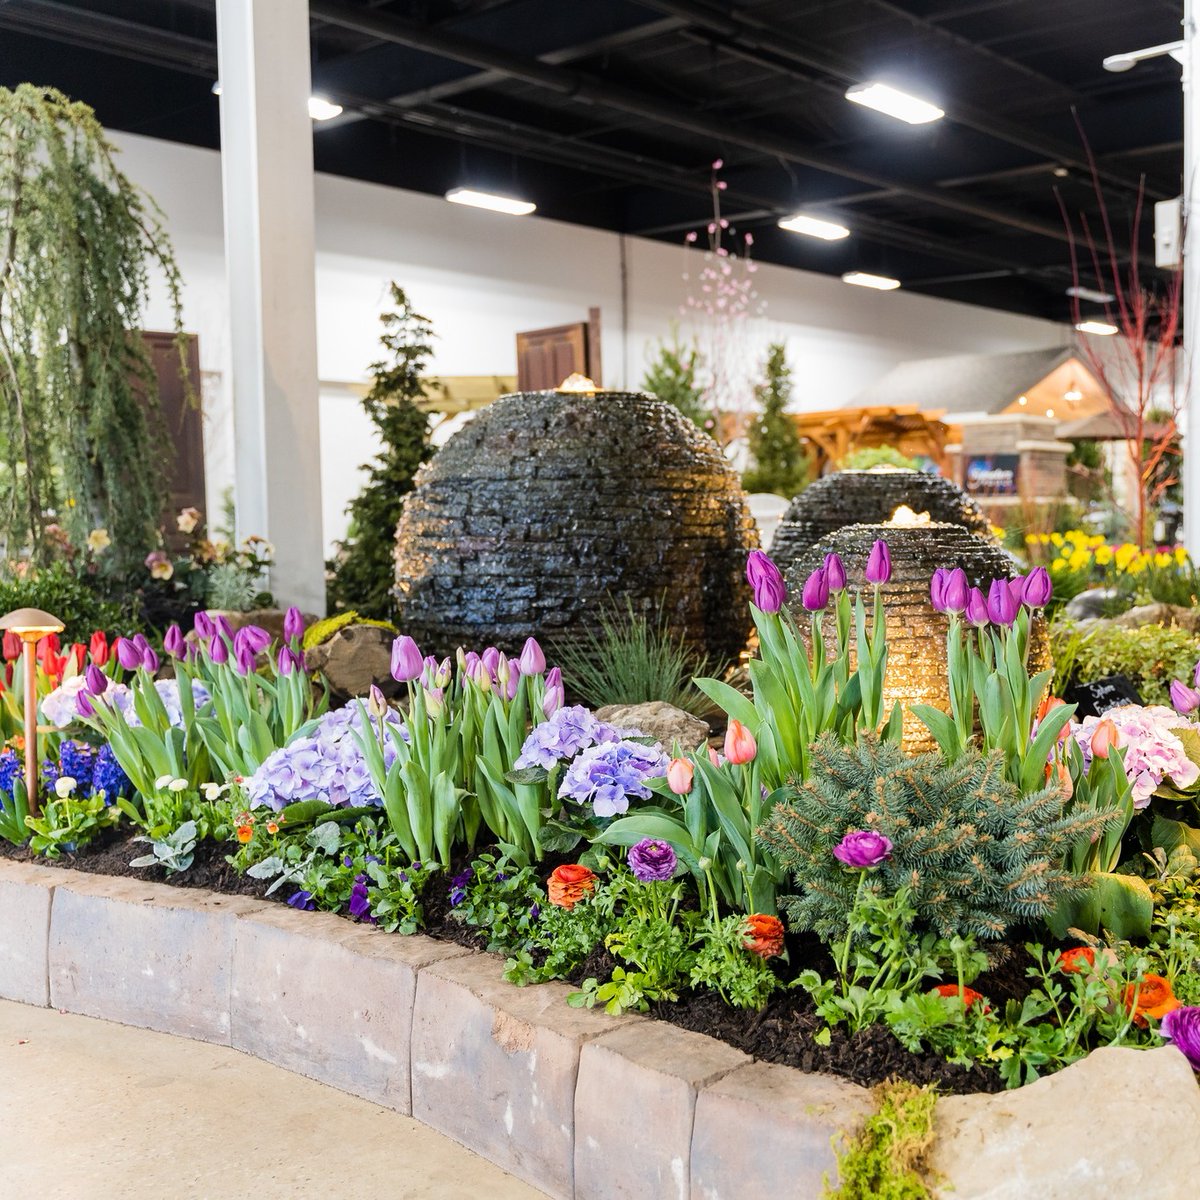 This weekend… Philly Home and Garden Show! Feb 23 - 25 | Halls A,B,C,D (Entrance 📍Hall A) phillyhomeandgarden.com — Follow more events at Expo and the Fairgrounds: 📆 phillyexpocenter.com/calendar 📥 phillyexpocenter.com/newsletter #makeitmontco #homeshow #homerennovations #DIY…